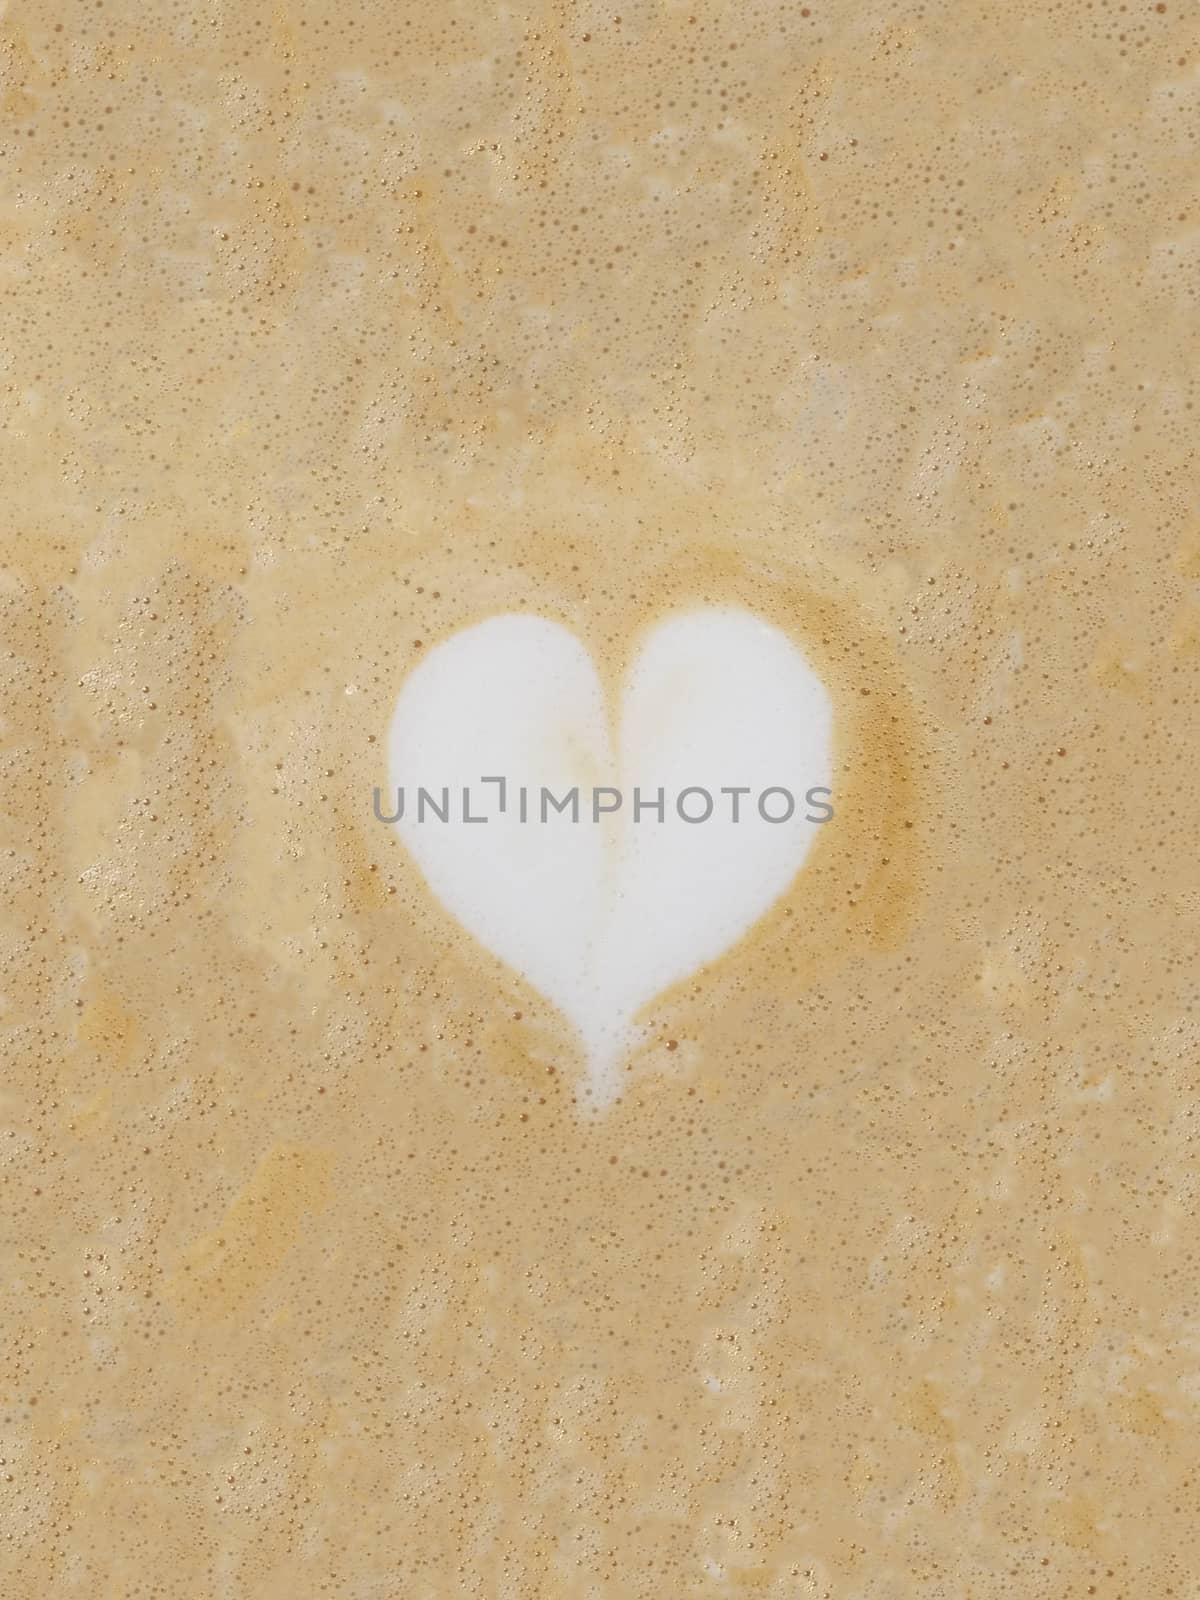 Cappuccino Foam with a Heart by whitechild